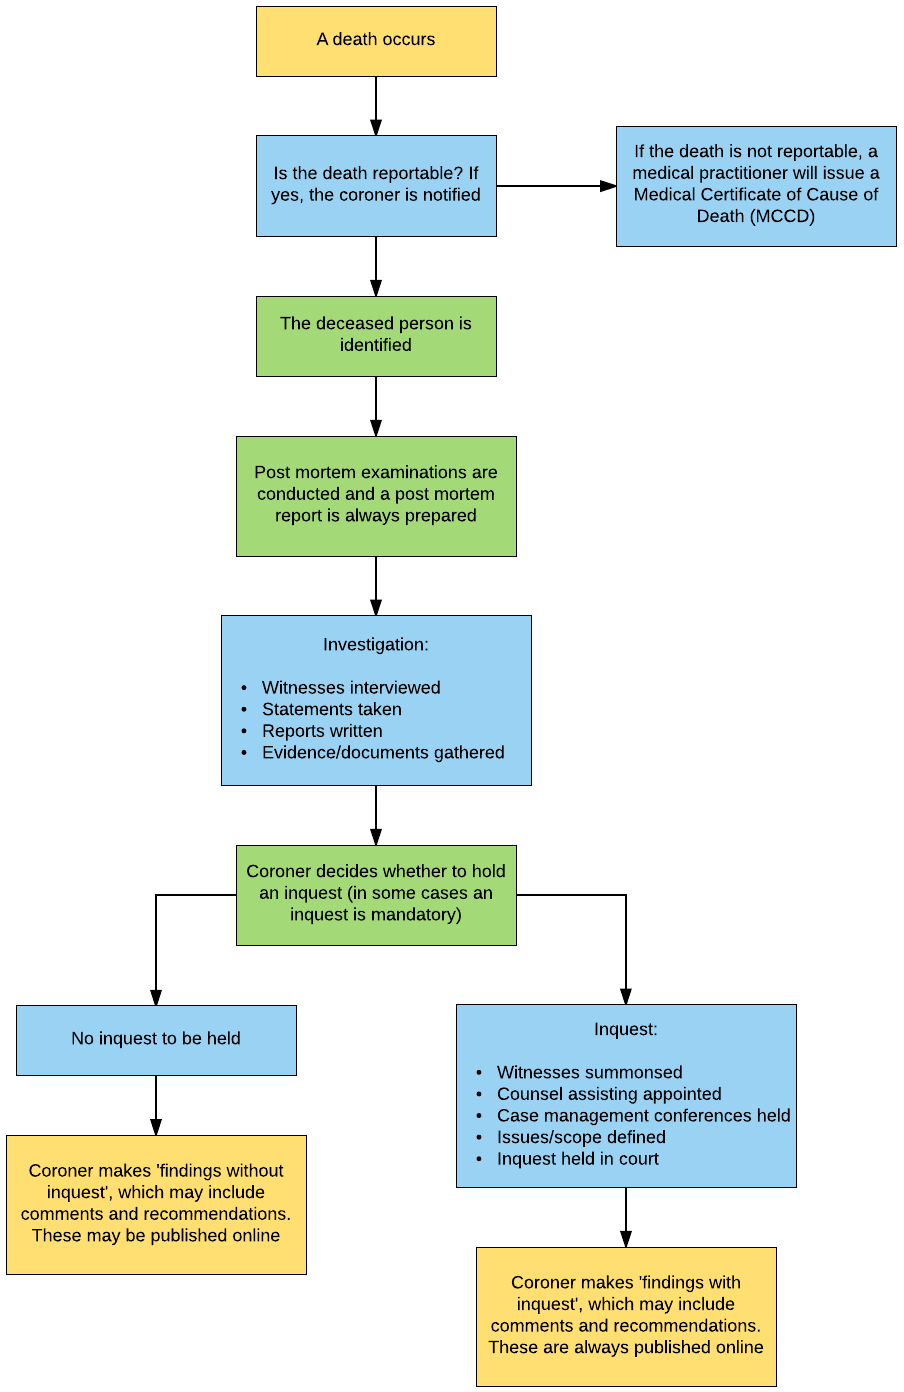 Figure 1 is a flow chart explaining a coronial investigation into a recent death. When a death occurs, either a doctor will write a Medical Certificate of Cause of Death or the death will be reported to the coroner. If the death is reported, a pathologist conducts post mortem examinations on the deceased person. If the death remains in the category of reportable deaths after this, the coroner will conduct a full investigation. If the legislation mandates it, or the coroner believes it is necessary, the coroner will hold an inquest. After the inquest or investigation, the coroner will write “findings” which may be published on the Magistrates Court web site. 